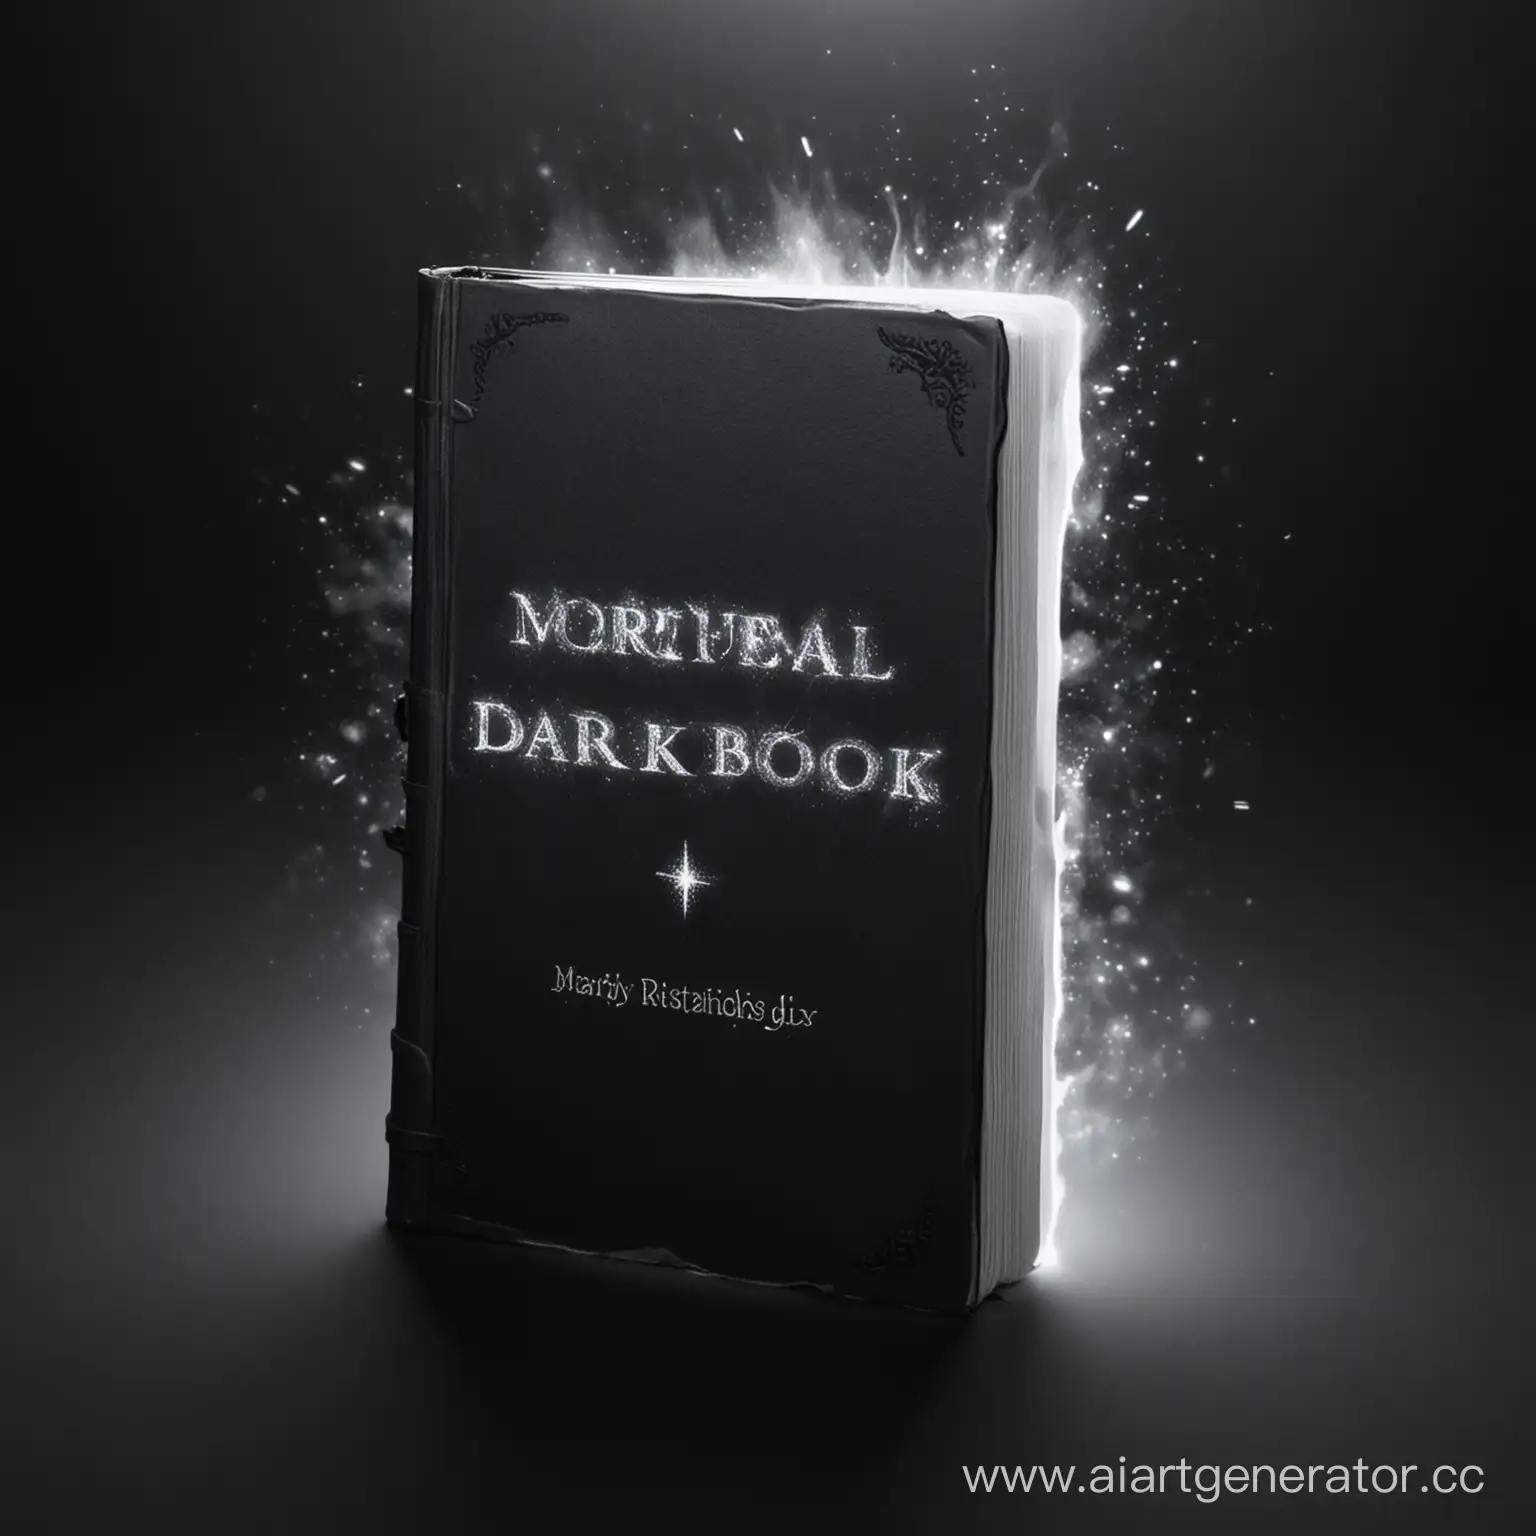 Dark-Book-with-Bright-White-Glow-and-Special-Effects